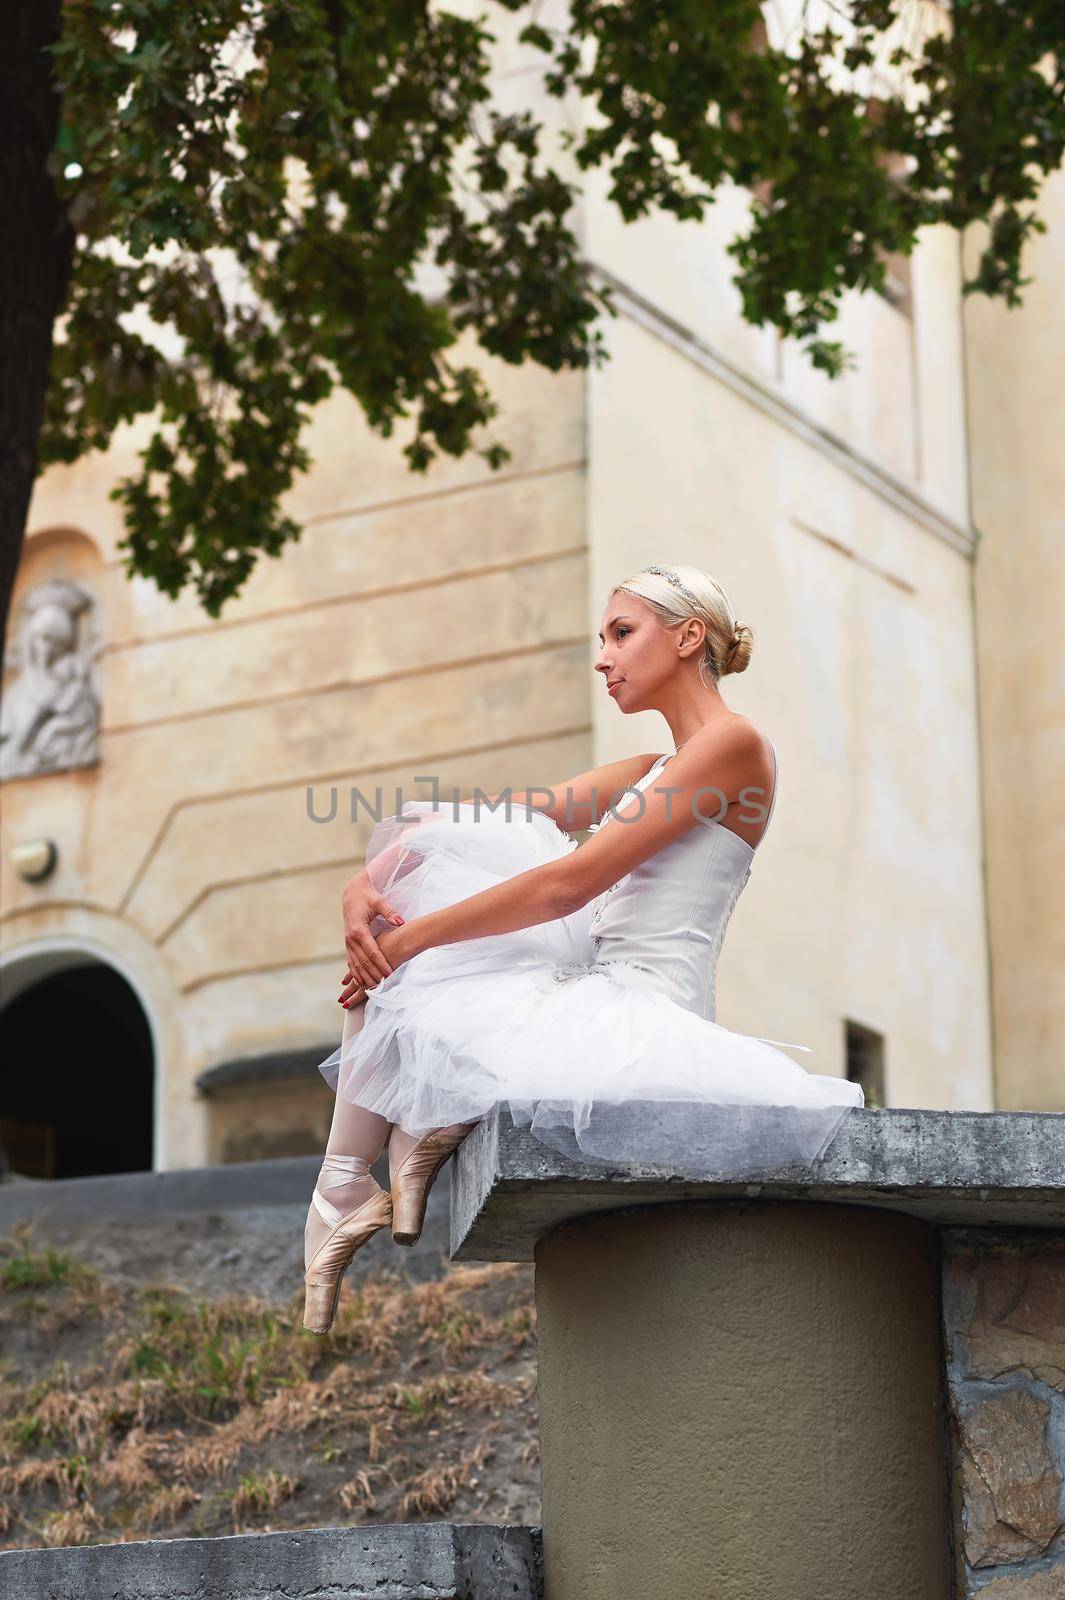 Vertical shot of a beautiful female ballet dancer sitting alone outdoors on the street of the city beauty elegance femininity sensuality artistic concept.